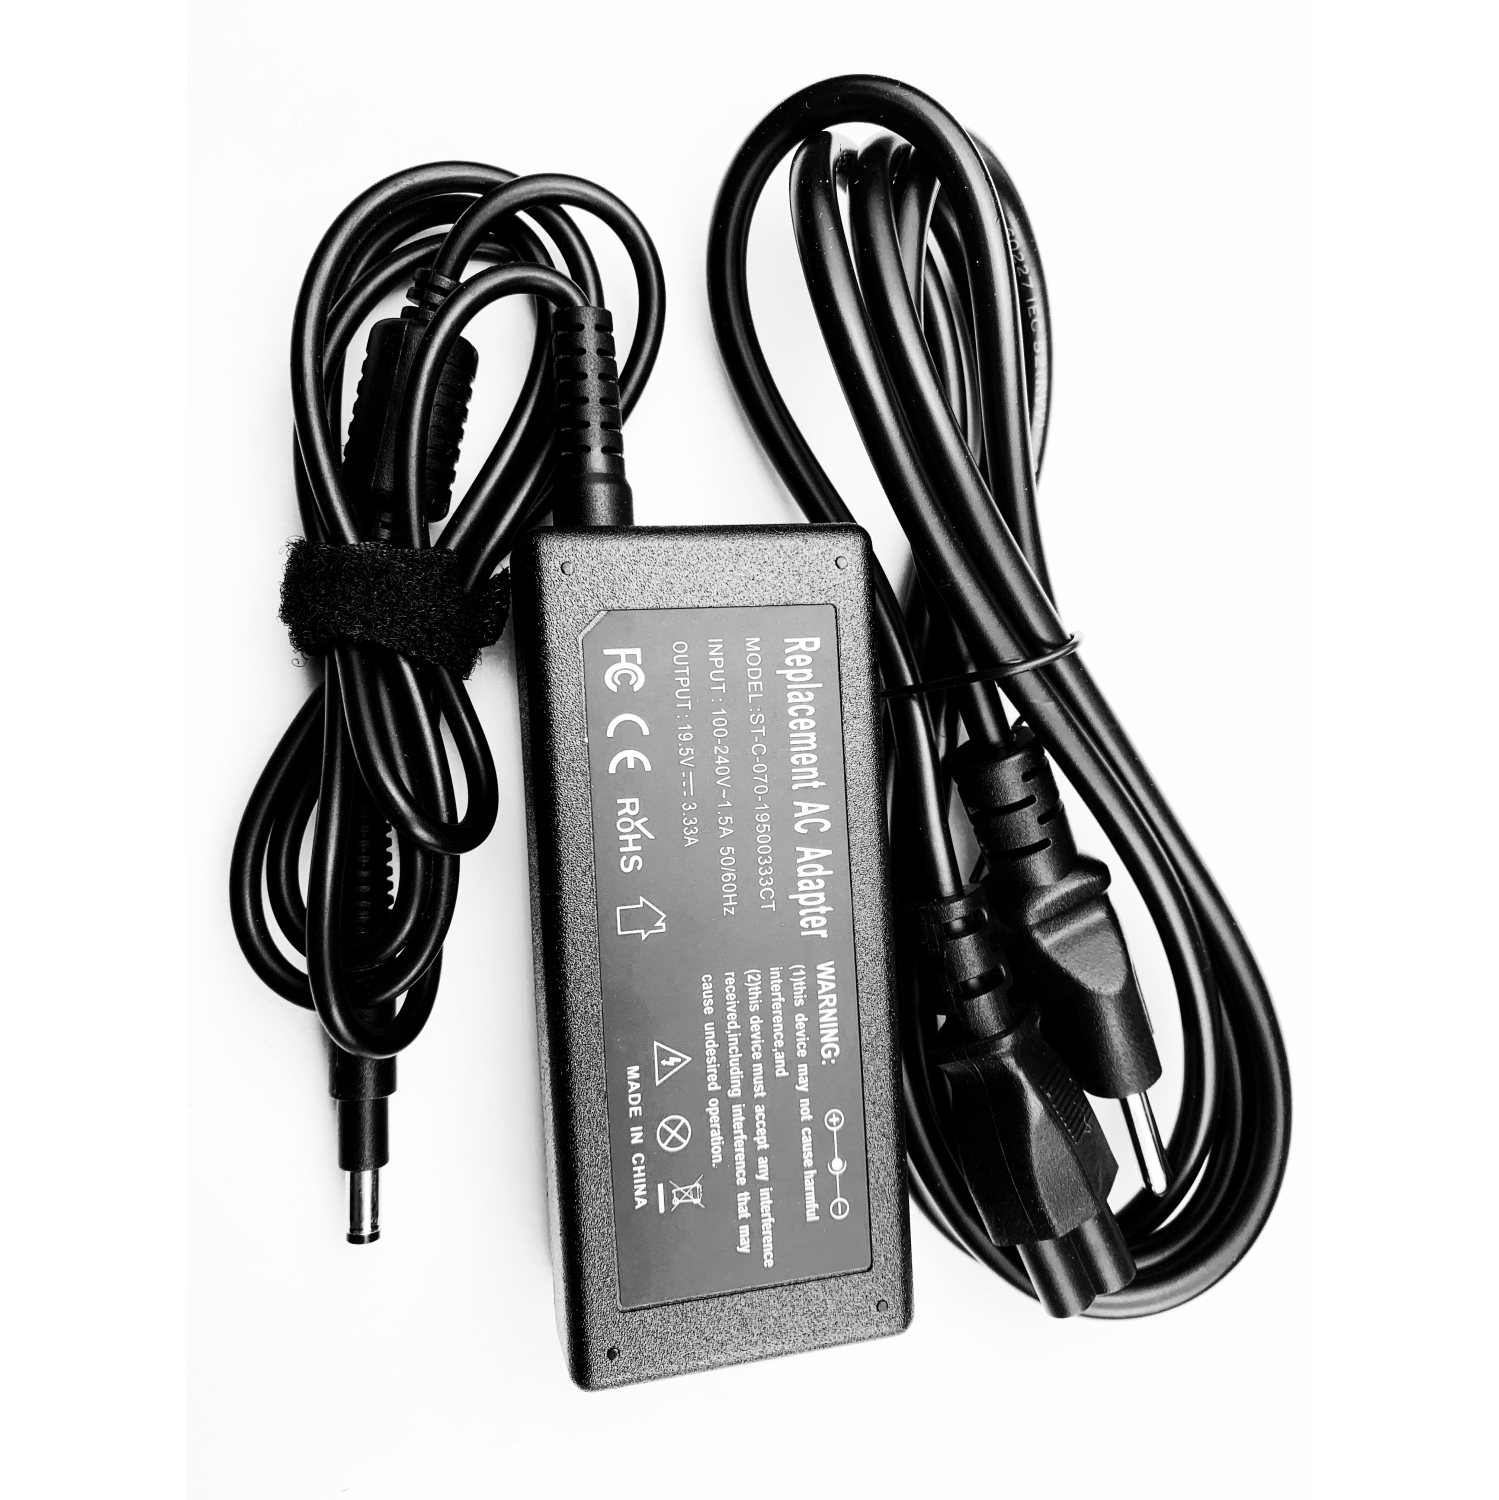 19.5V 65W 4.75mm x 1.7mm new AC adapter power cord charger for HP Envy 13 Pvilion Sleekbook 14 15